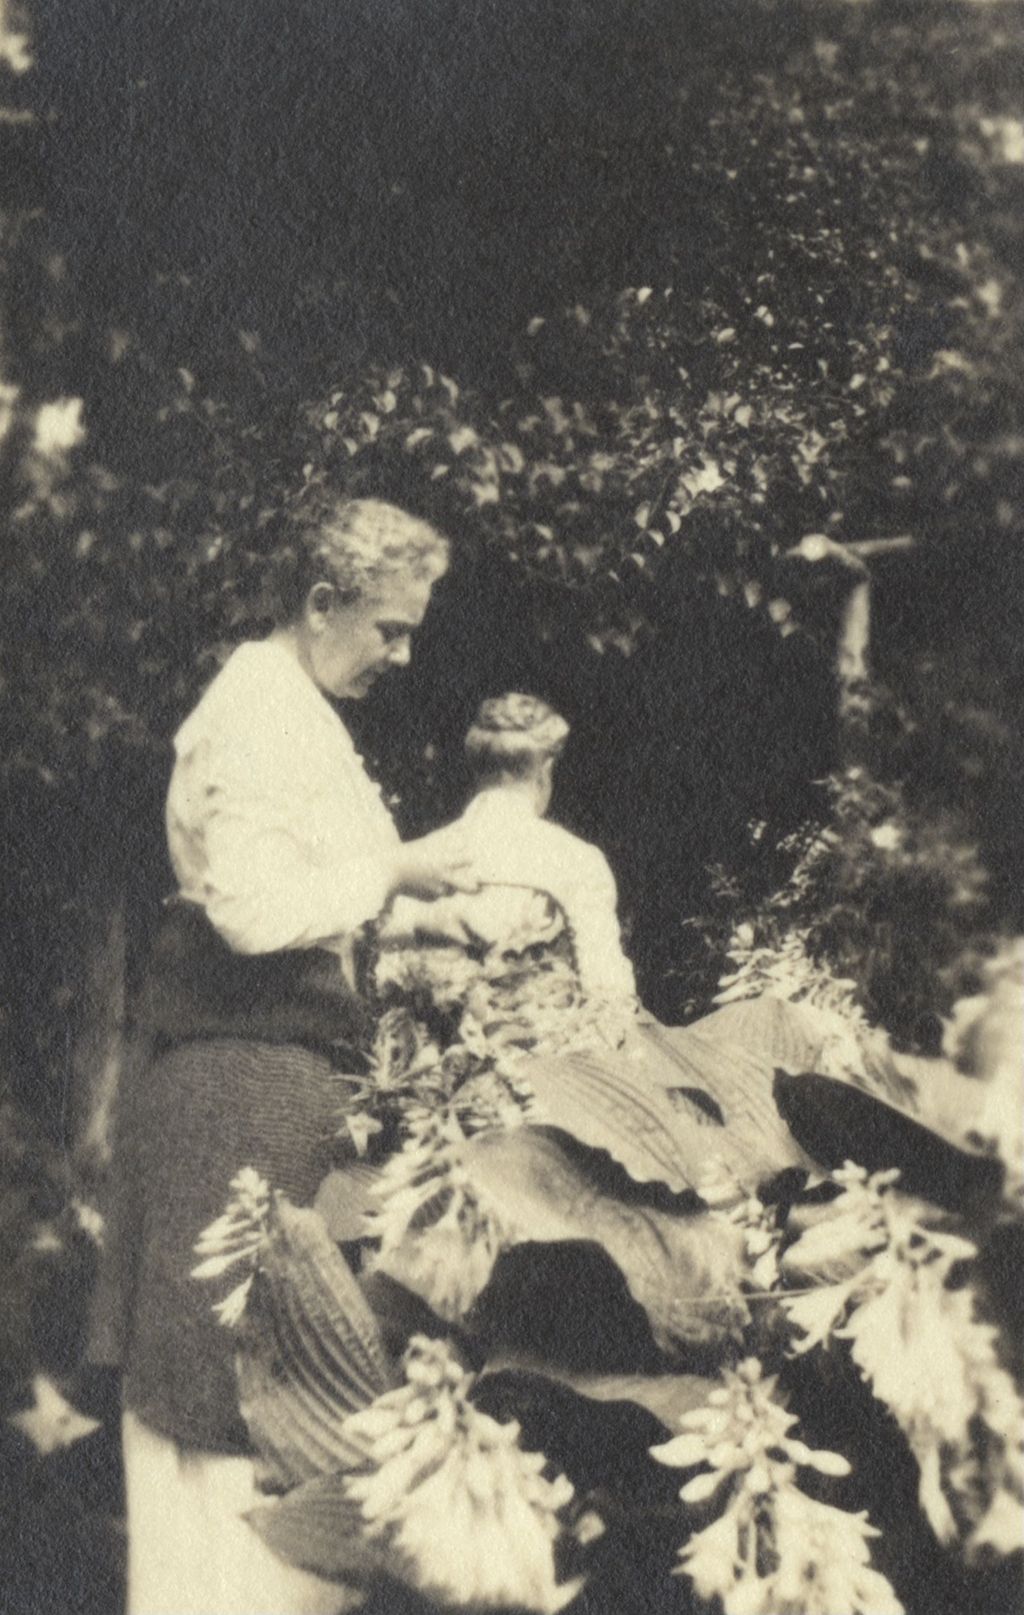 Miniature of Mary Rozet Smith and Louise De Koven Bowen gathering flowers at Bowen Country Club